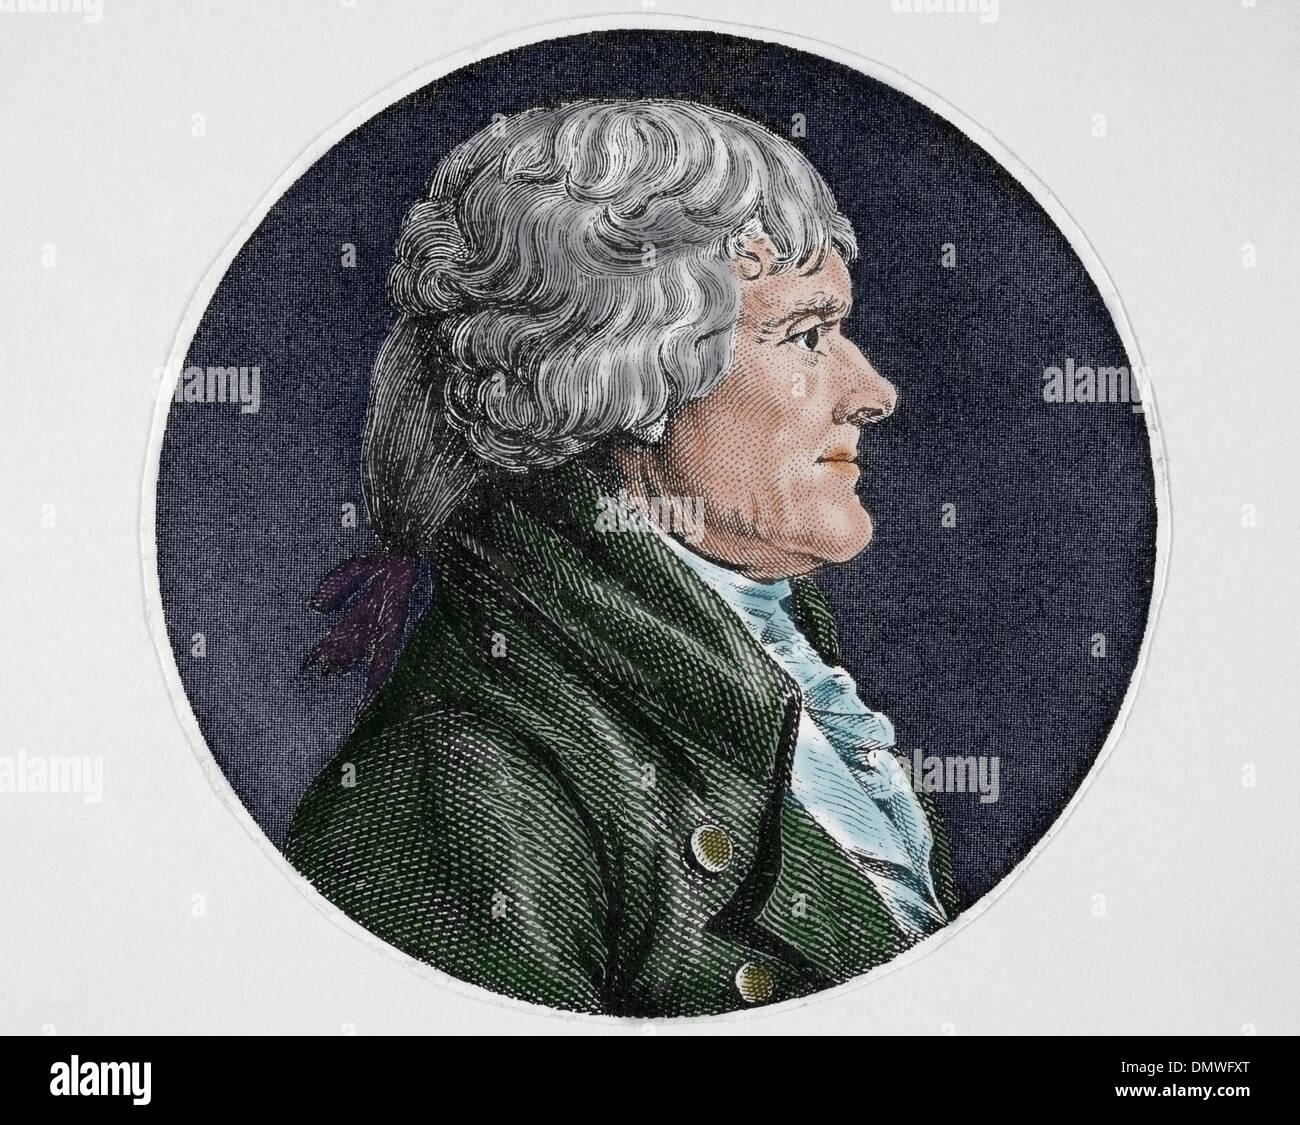 Thomas Jefferson (1743-1826). 3rd President and one of the Founding Fathers of the United States. Engraving. Colored. Stock Photo